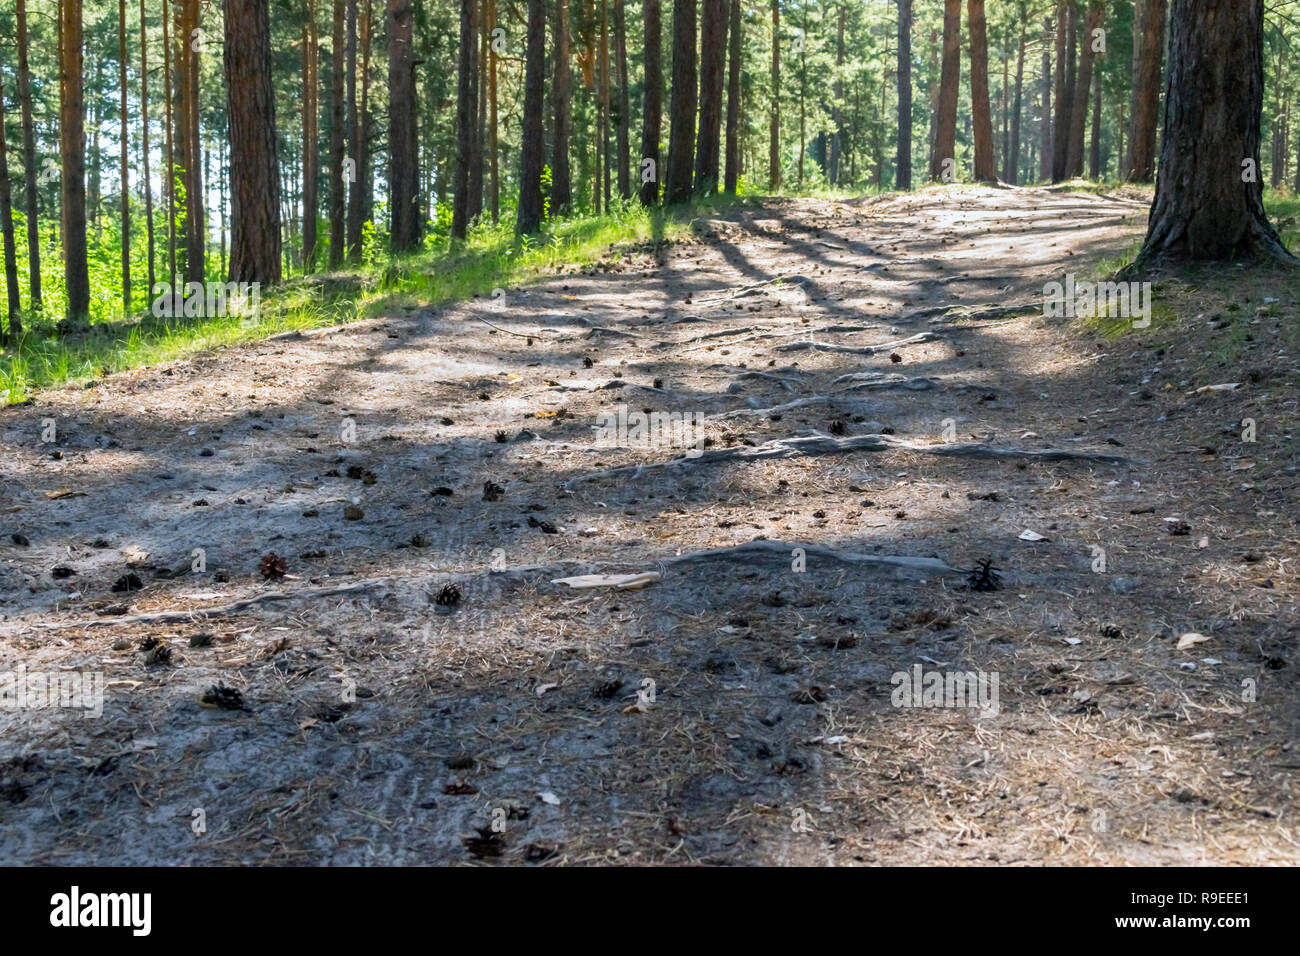 Sunny pathway in the forest on a summer day with pine trees shadows Stock Photo